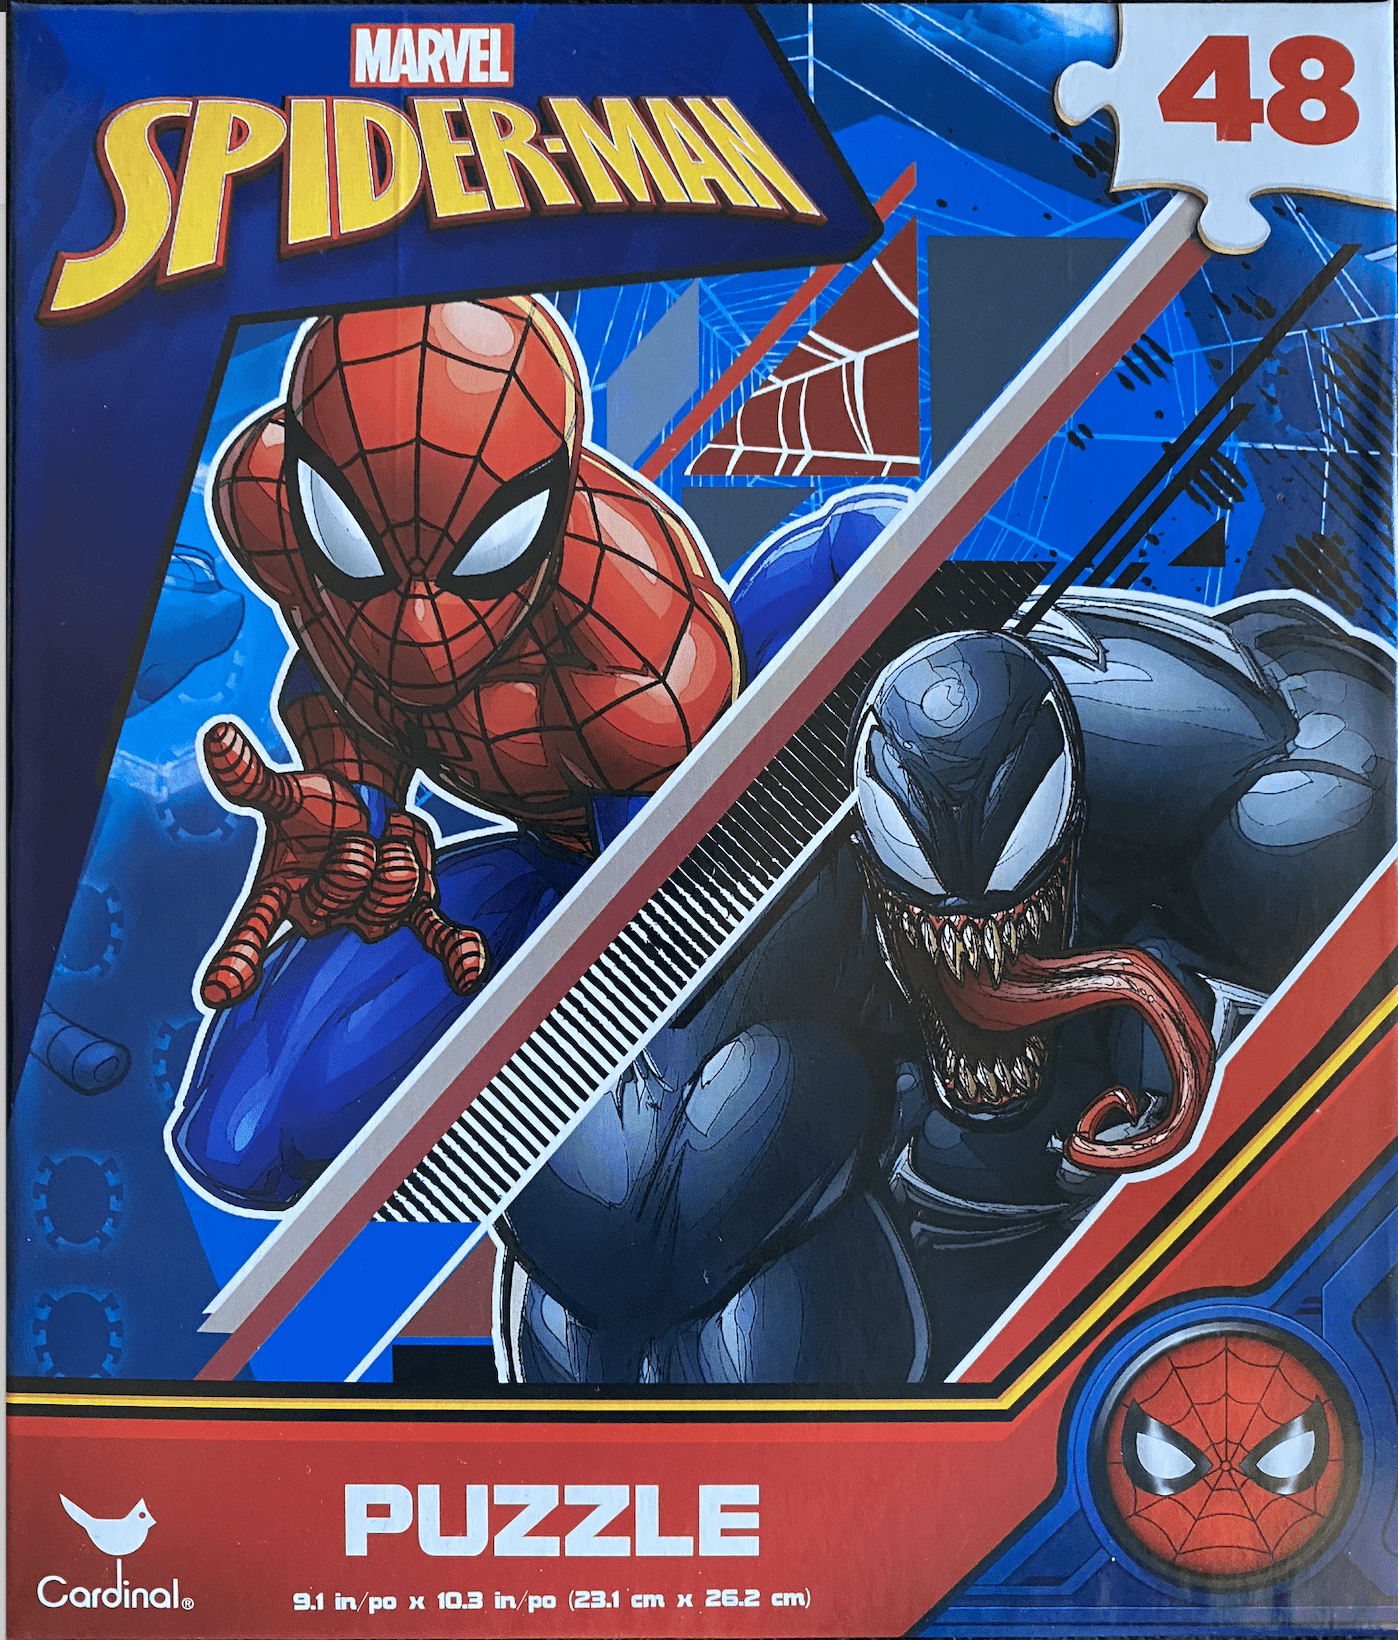 MARVEL SPIDERMAN NEW 48 Piece Jigsaw Puzzle Cube 9 in x 10 in Cardinal 